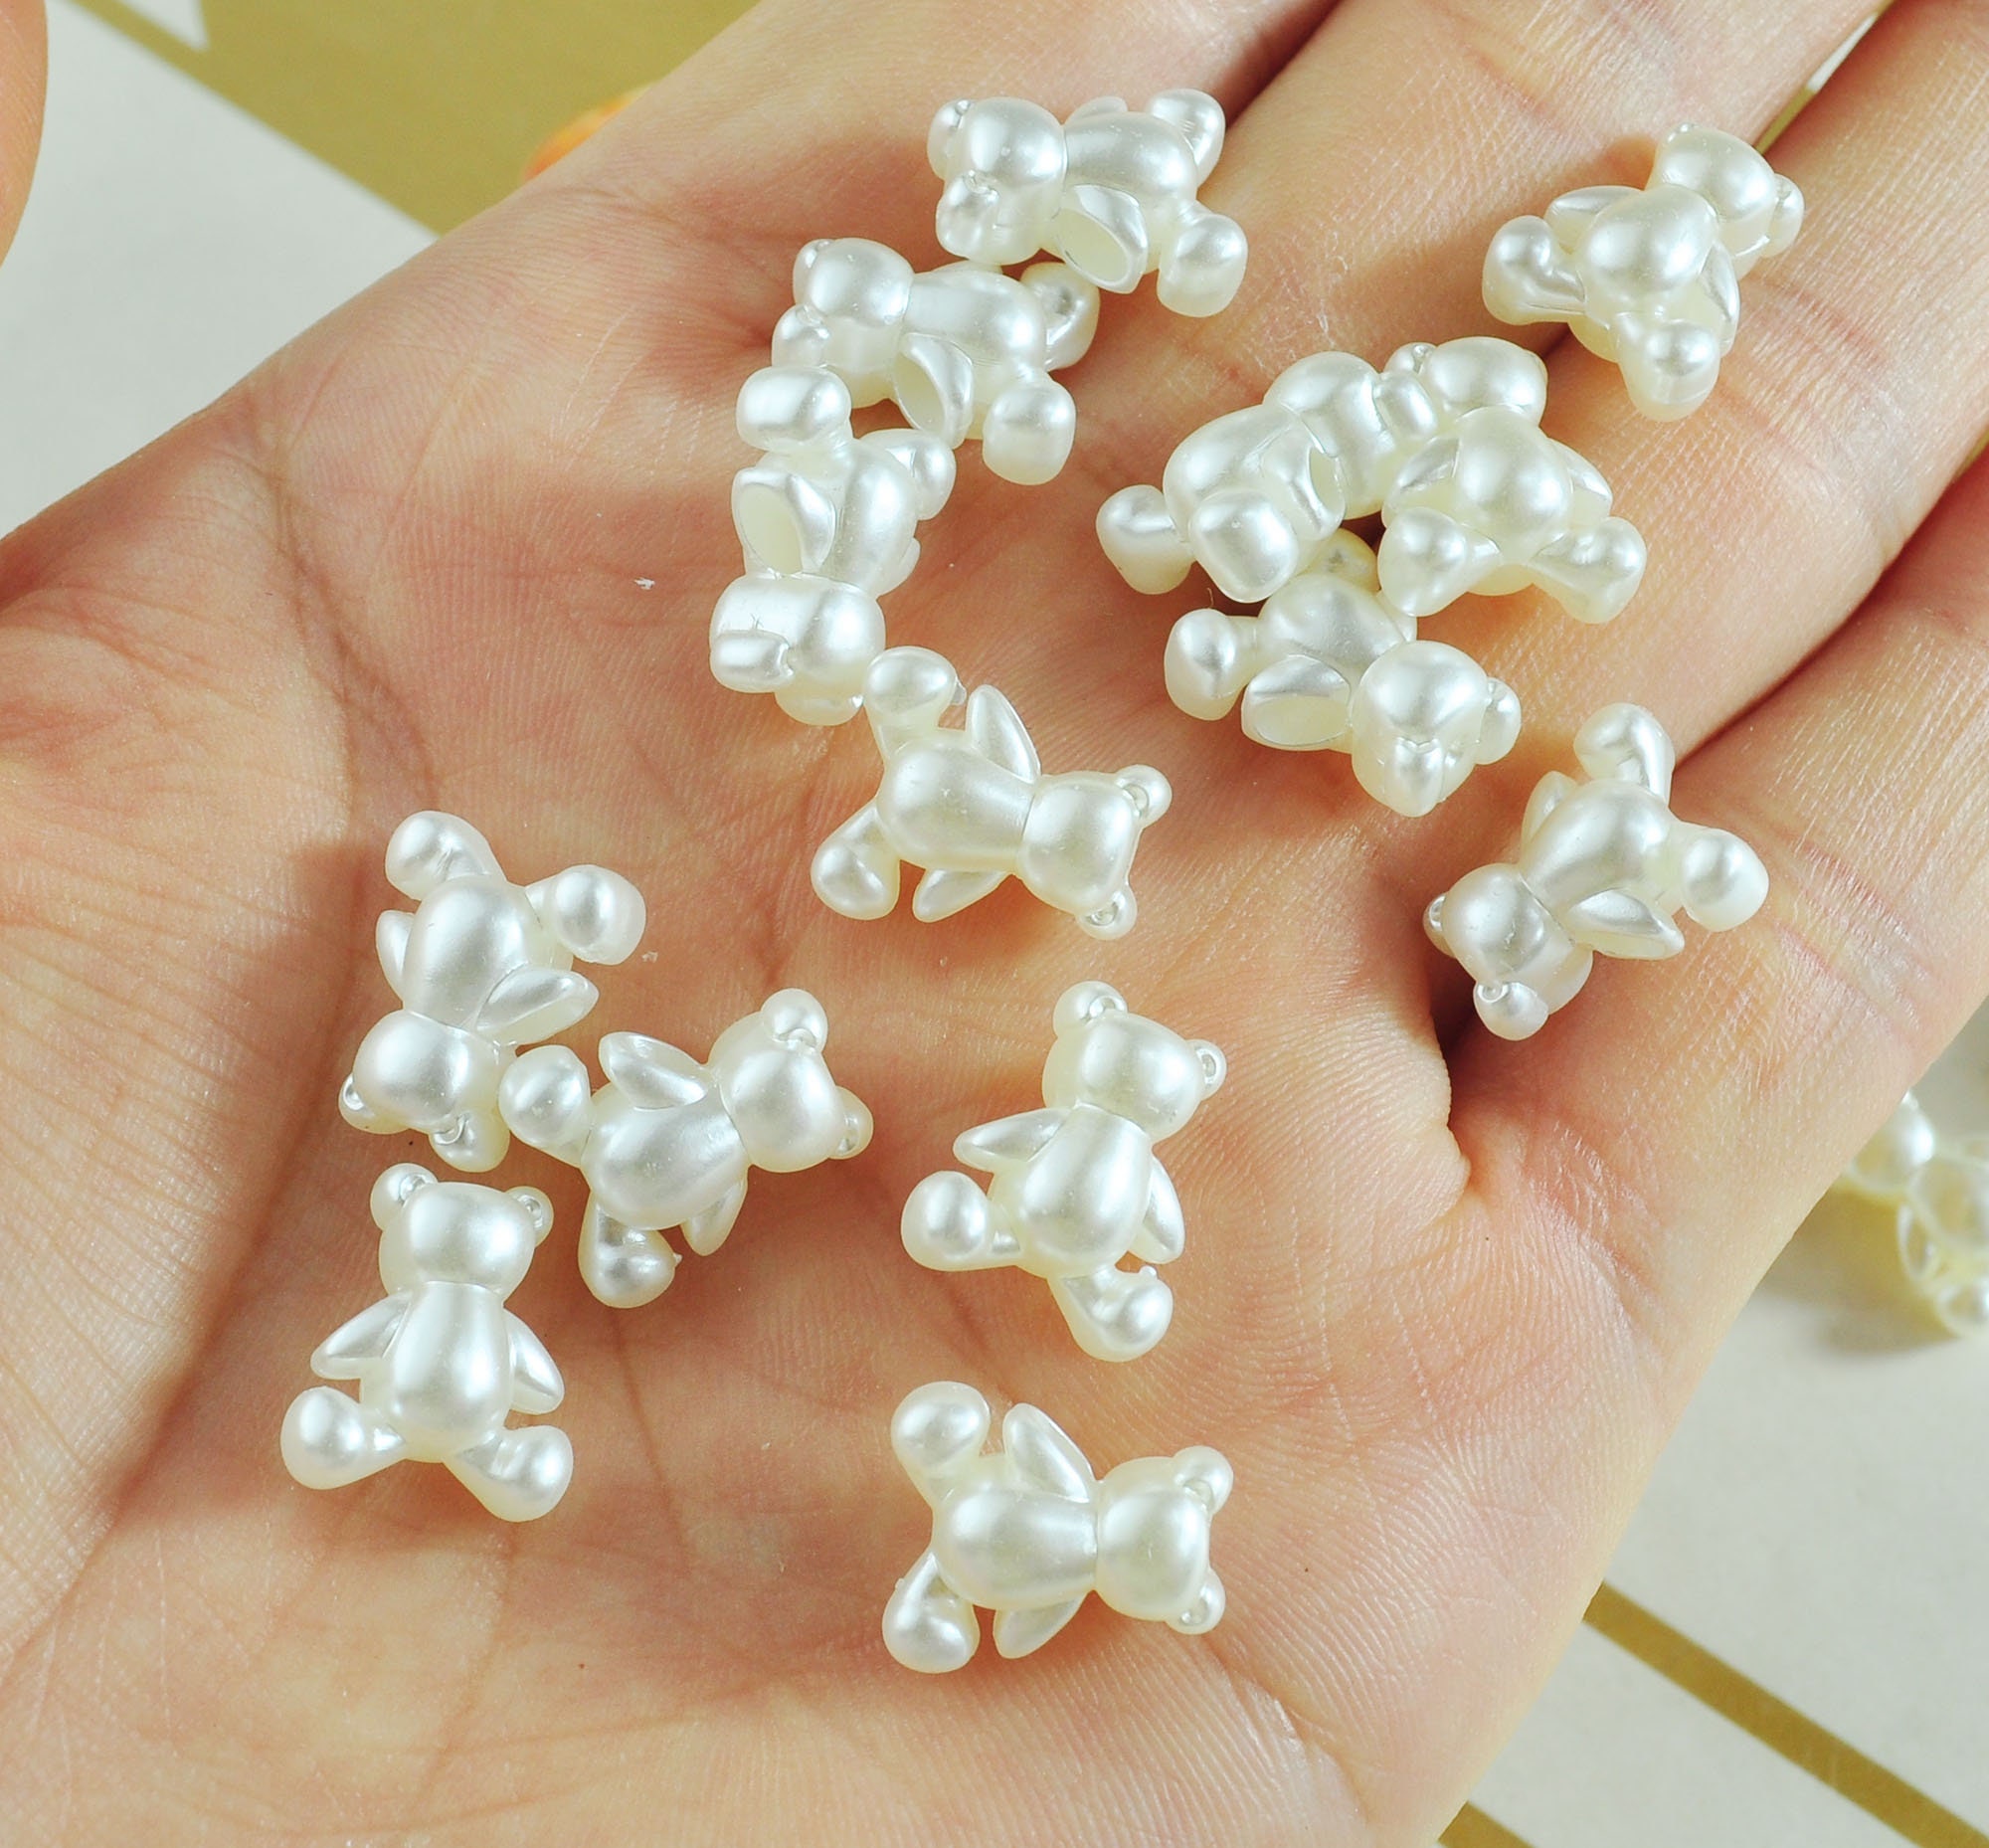  20Pcs Round Resin Beads Beads for Jewelry Making Bracelet  DIY,Line,14x9mm-20Pcs : Arts, Crafts & Sewing